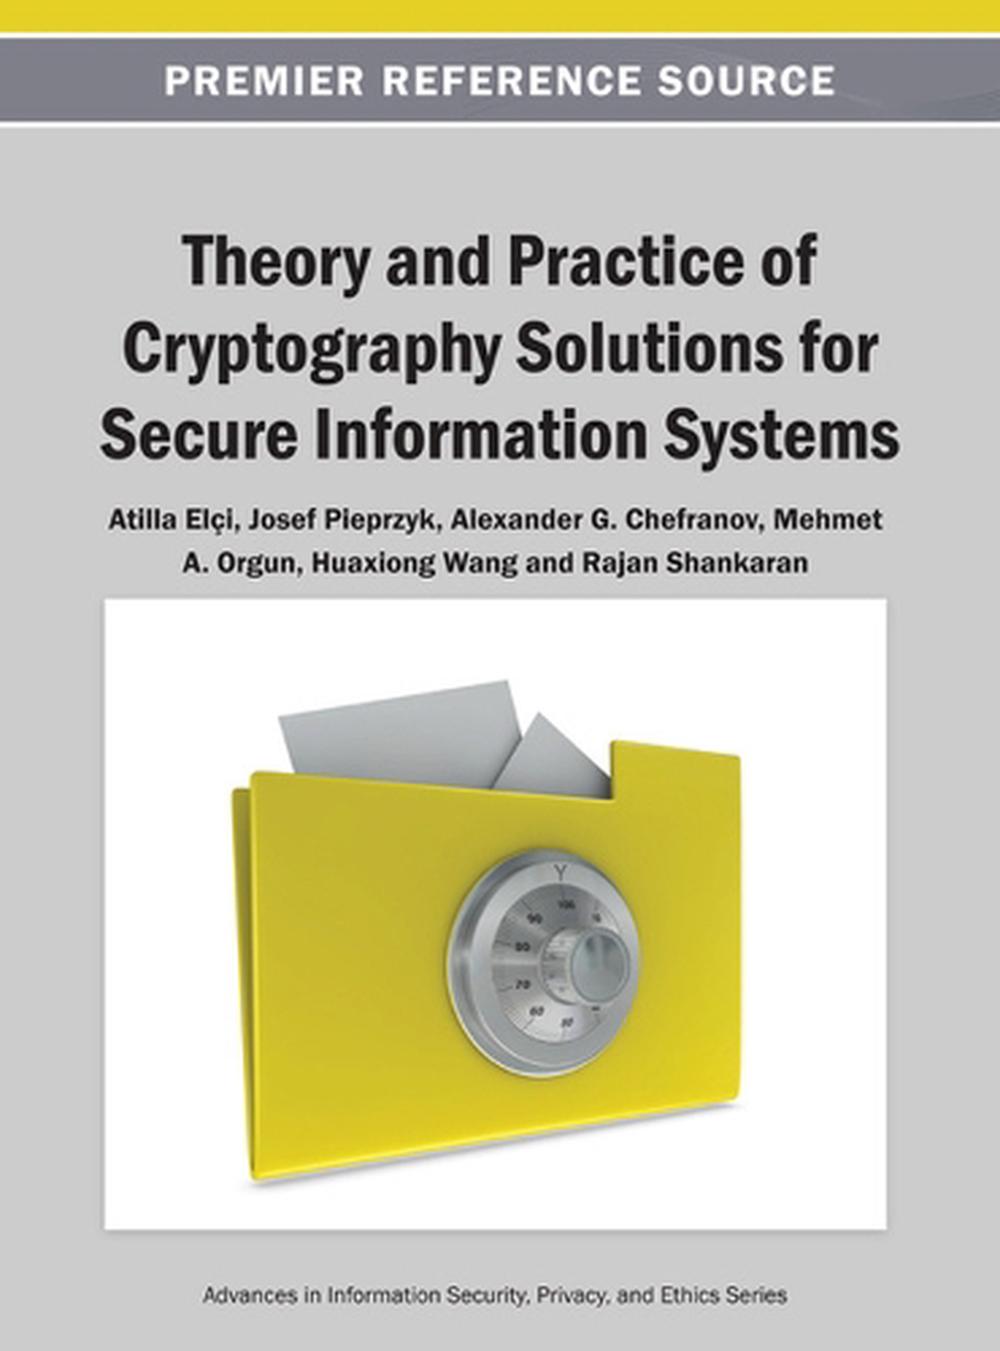 Theory and Practice of Cryptography Solutions for Secure Information